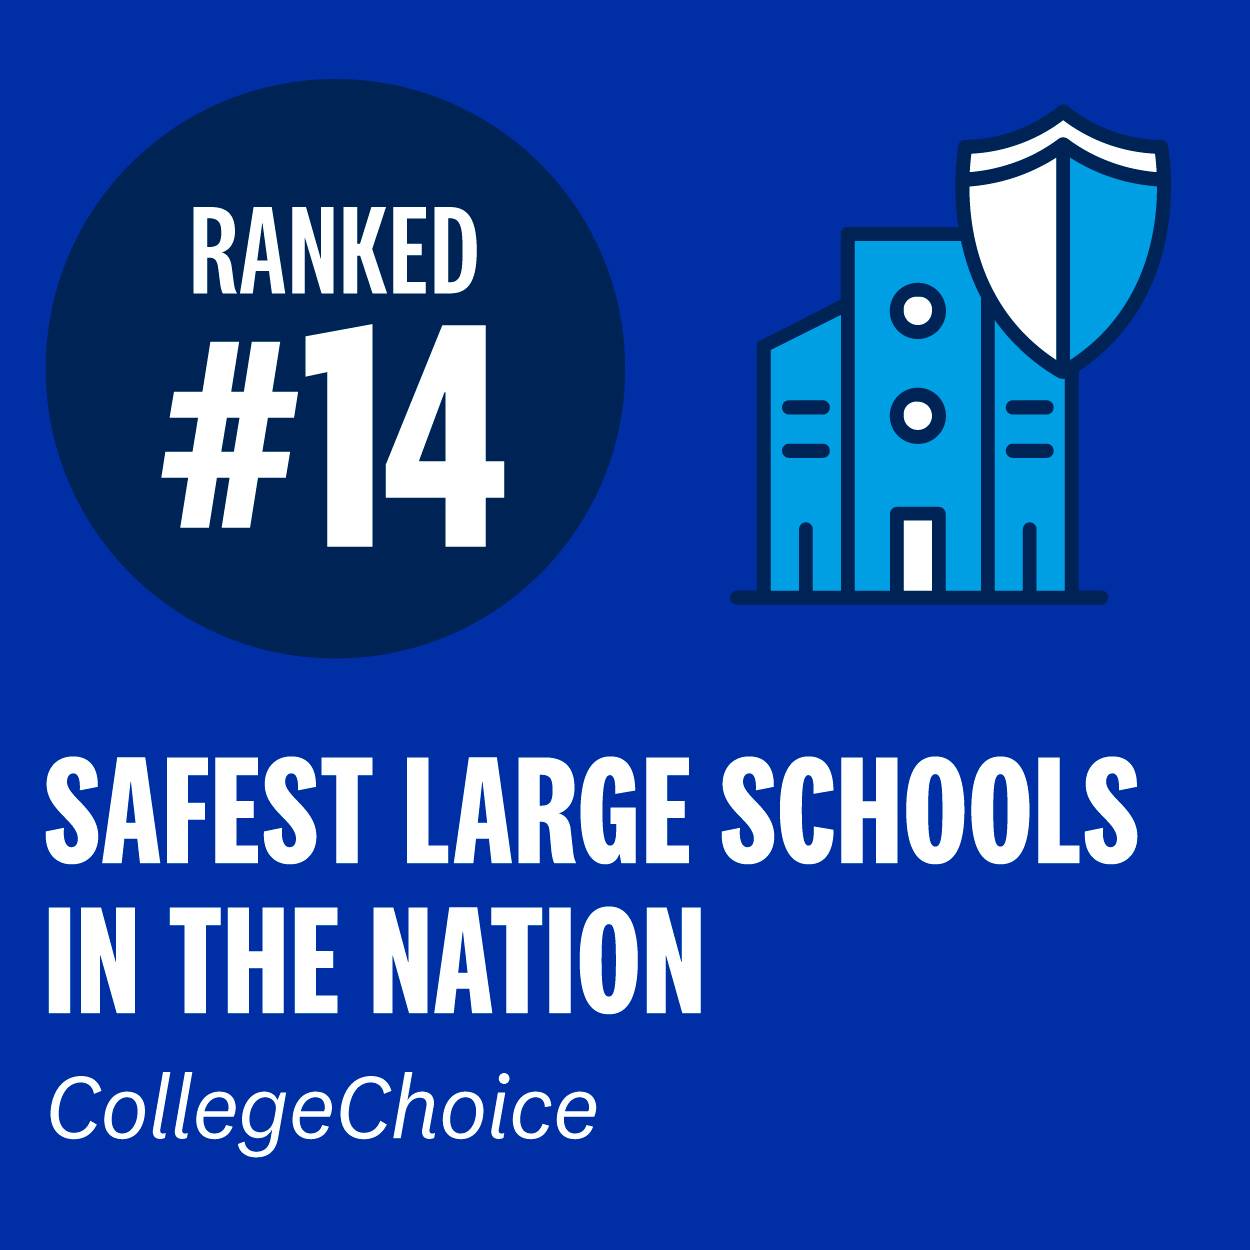 Ranked #14 among the safest large schools in the nation by CollegeChoice